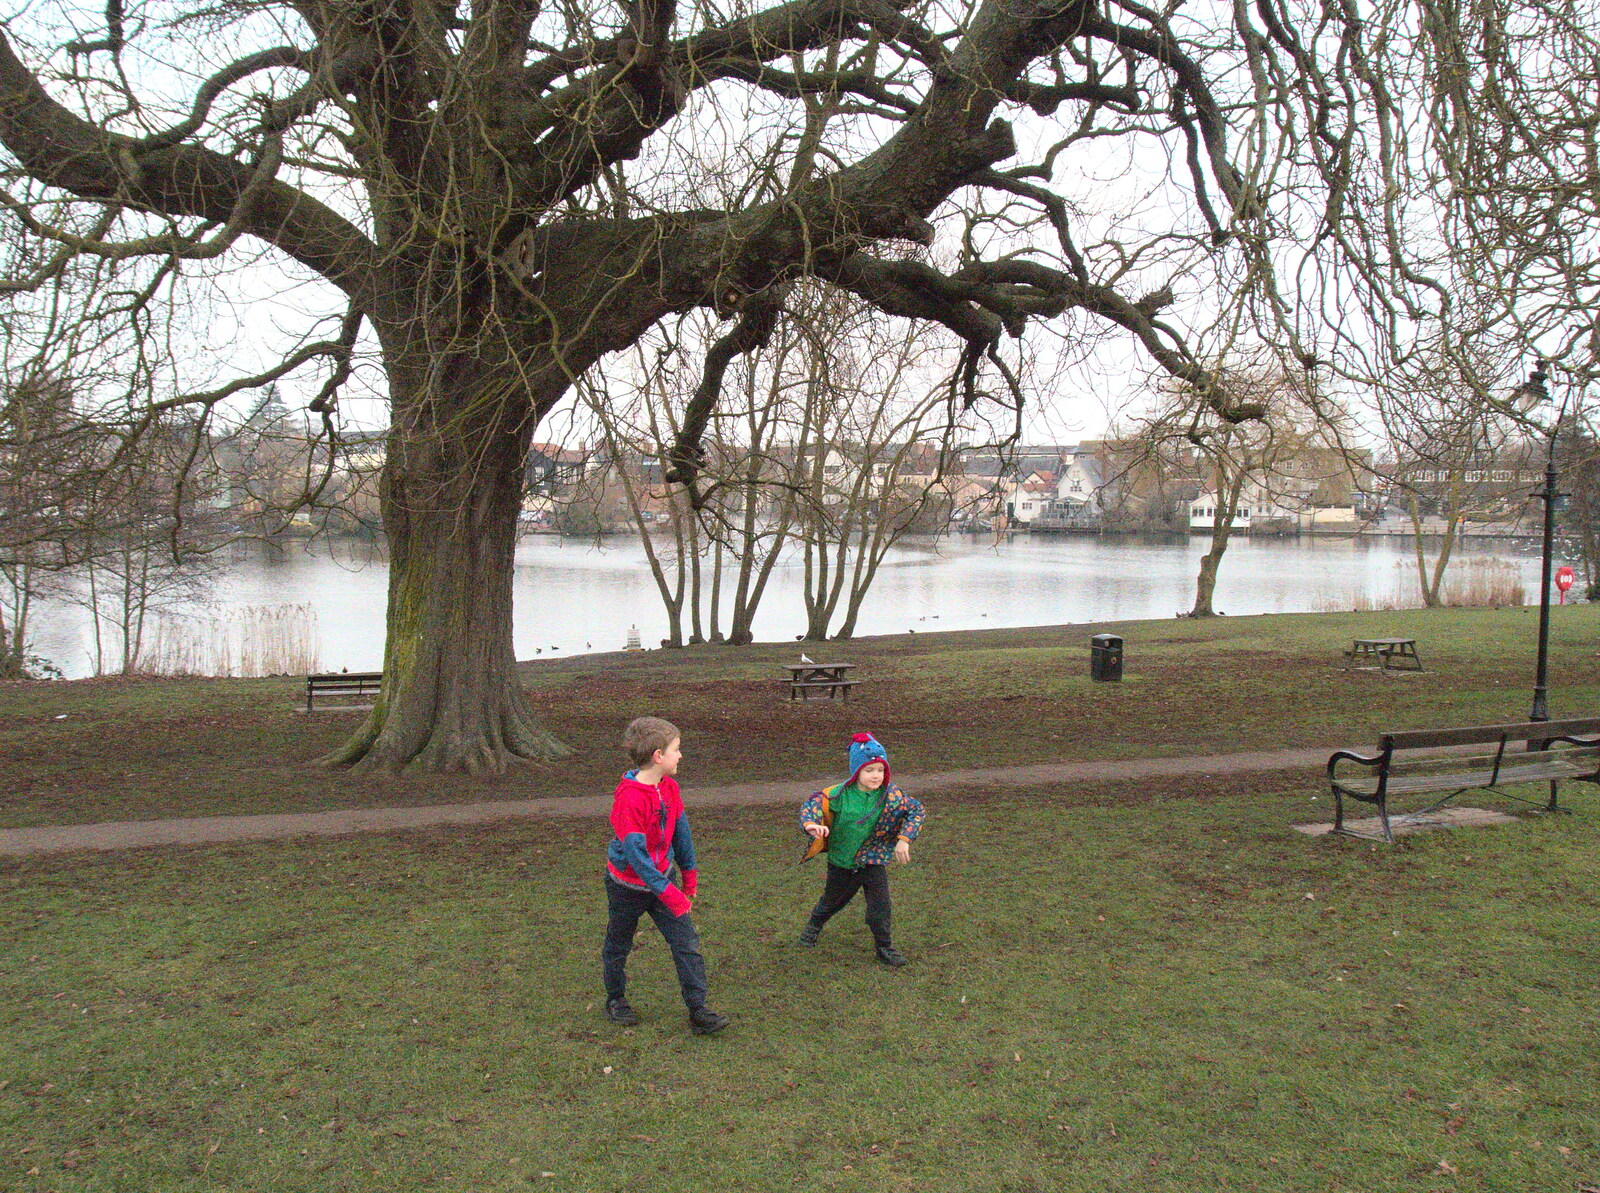 The boys run around from Little Venice and Diss Park, West London and Norfolk - 17th February 2017